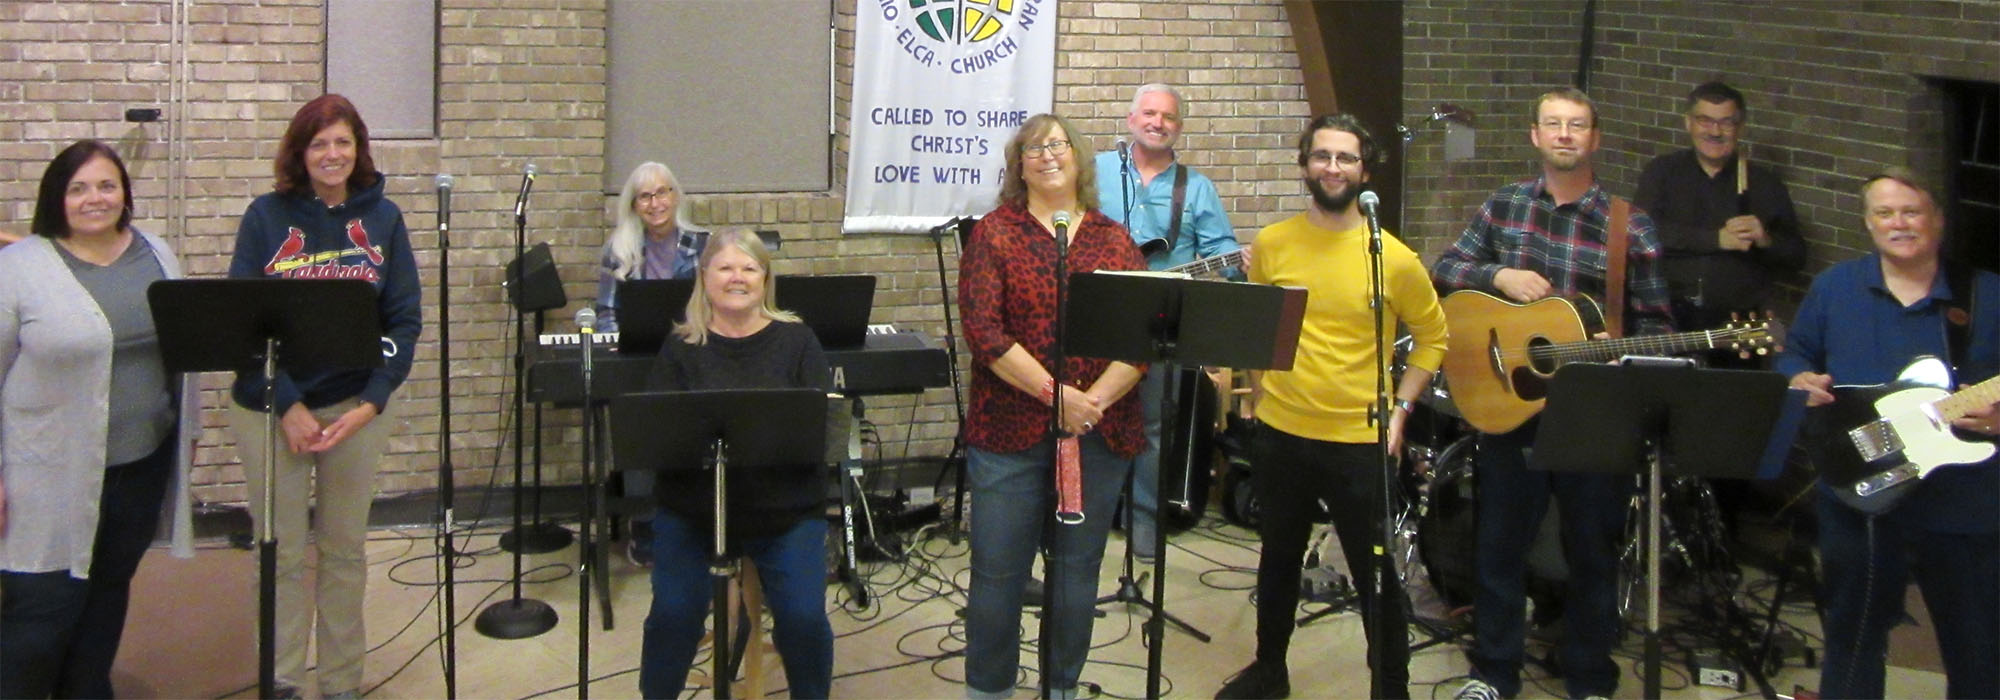 Praise Band at Our Lord's Lutheran Church